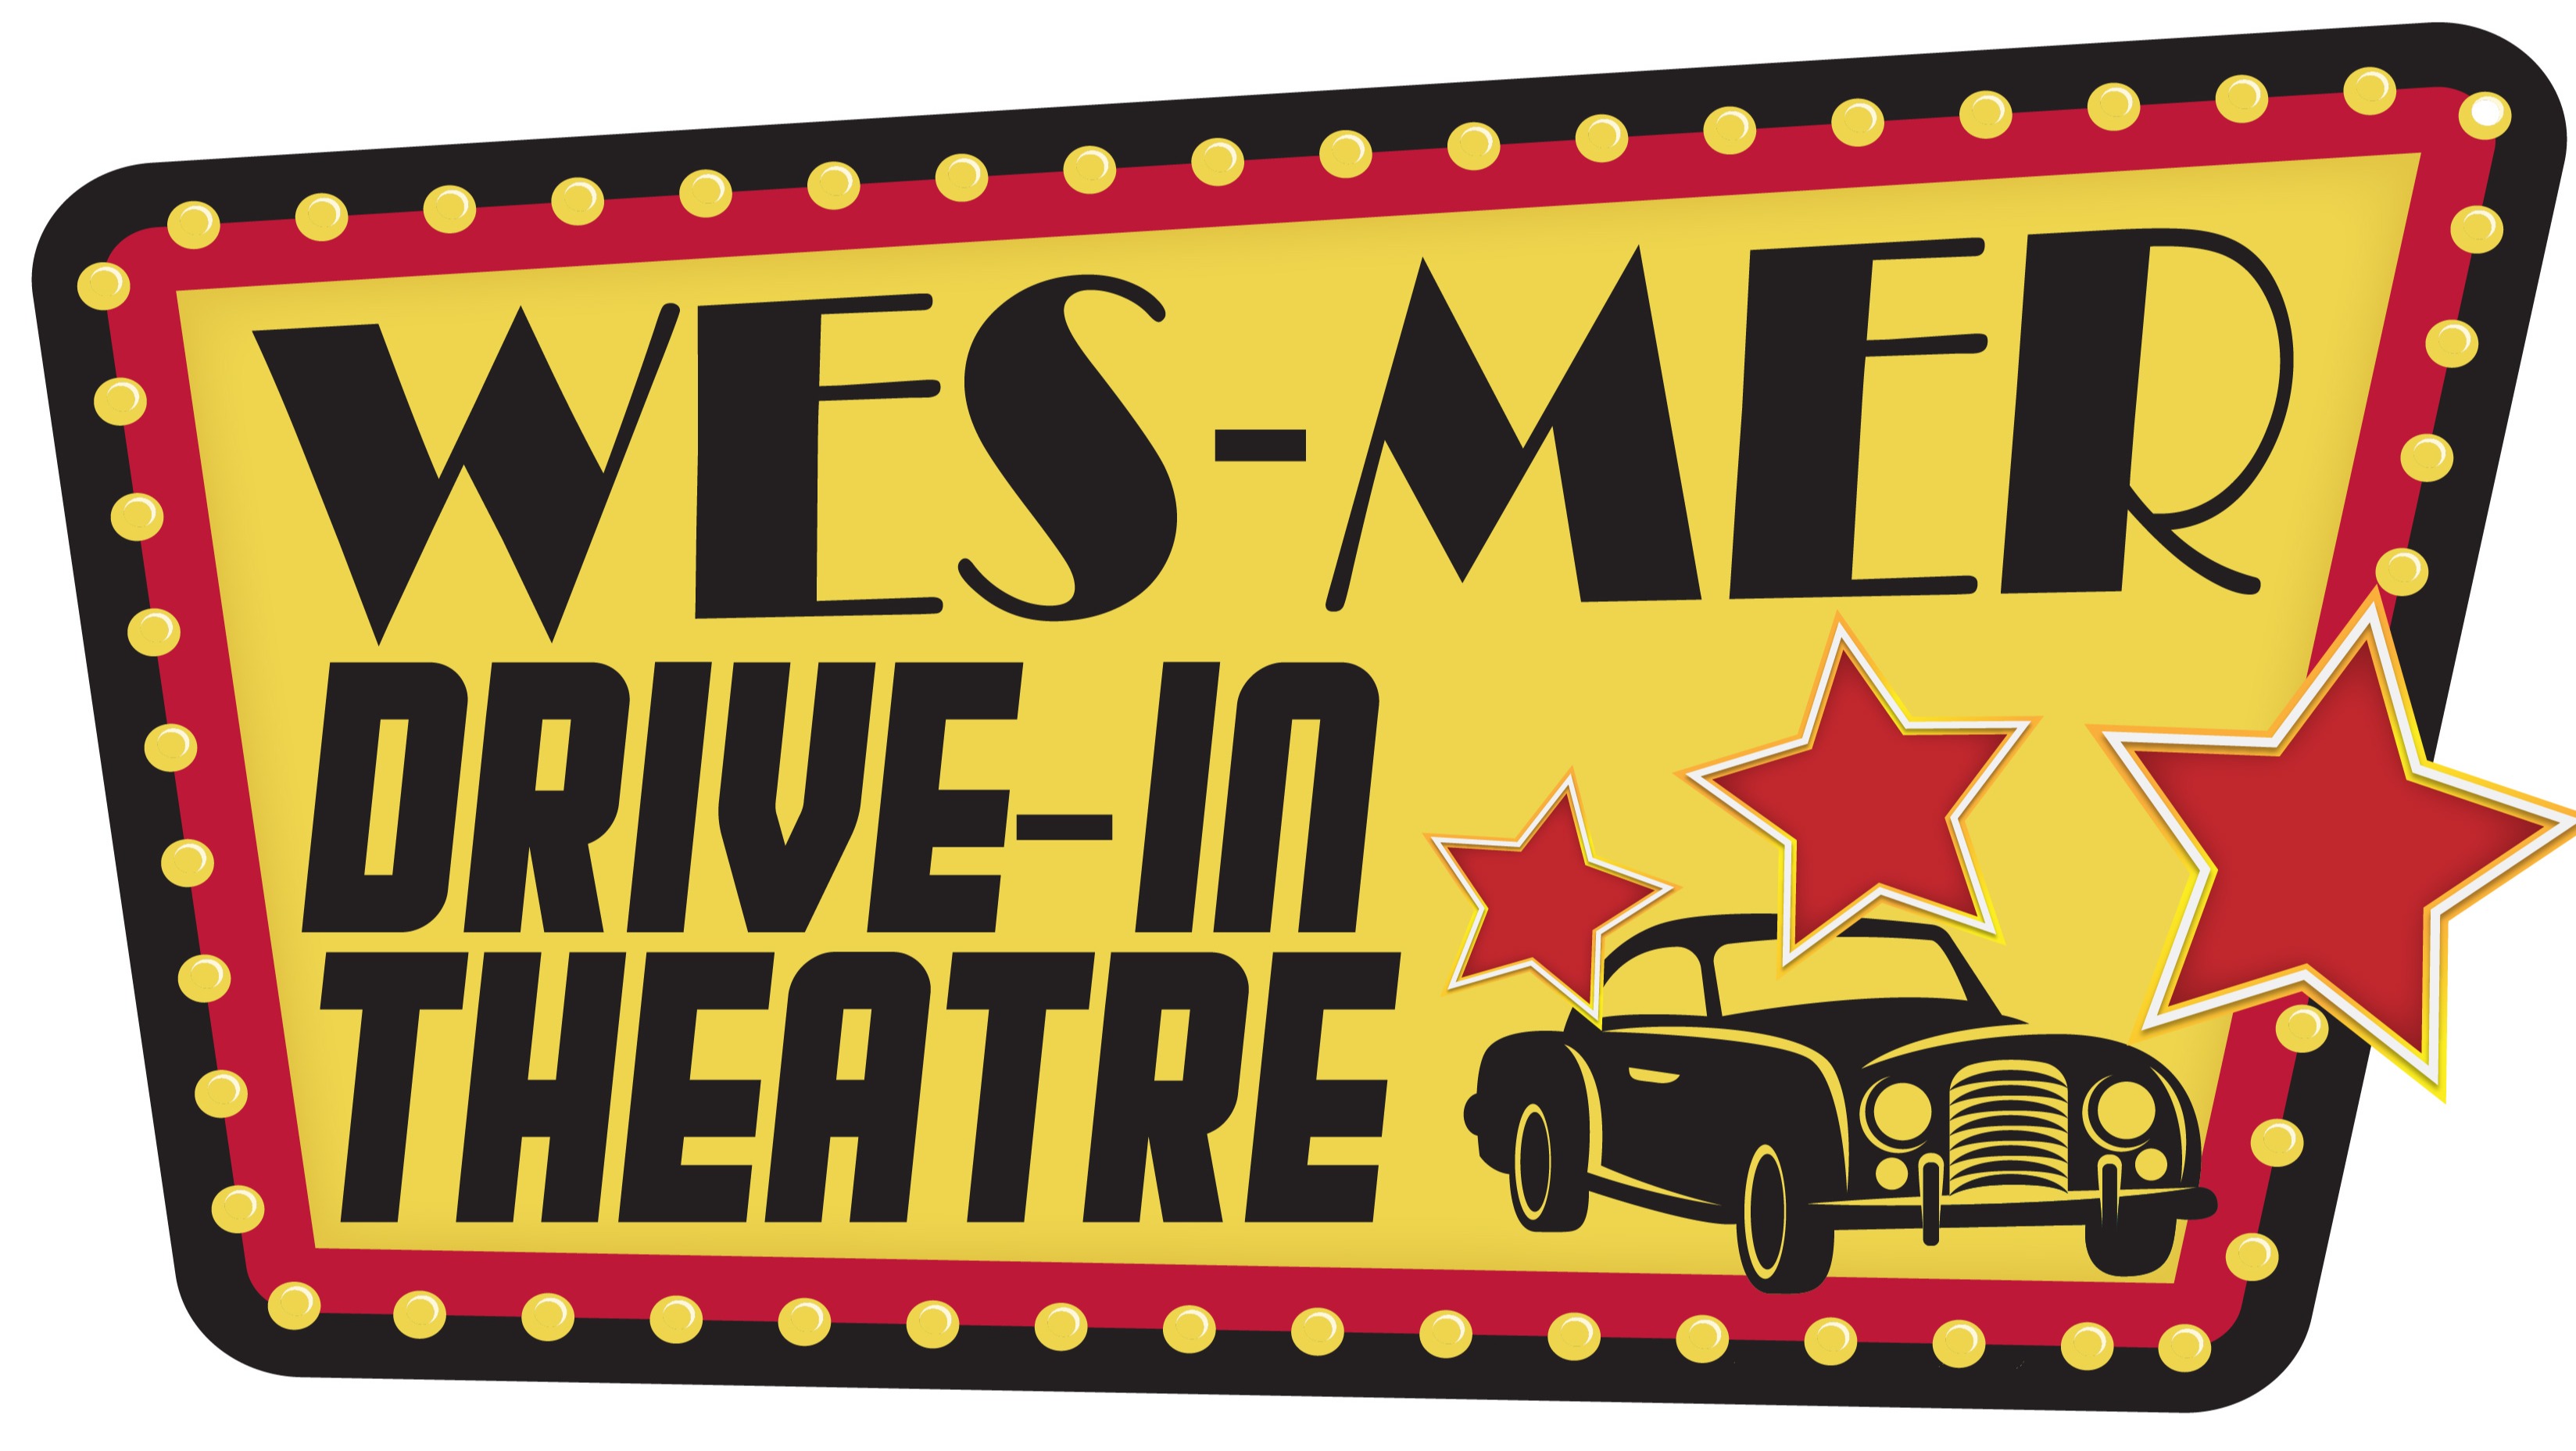 wes mer drive in